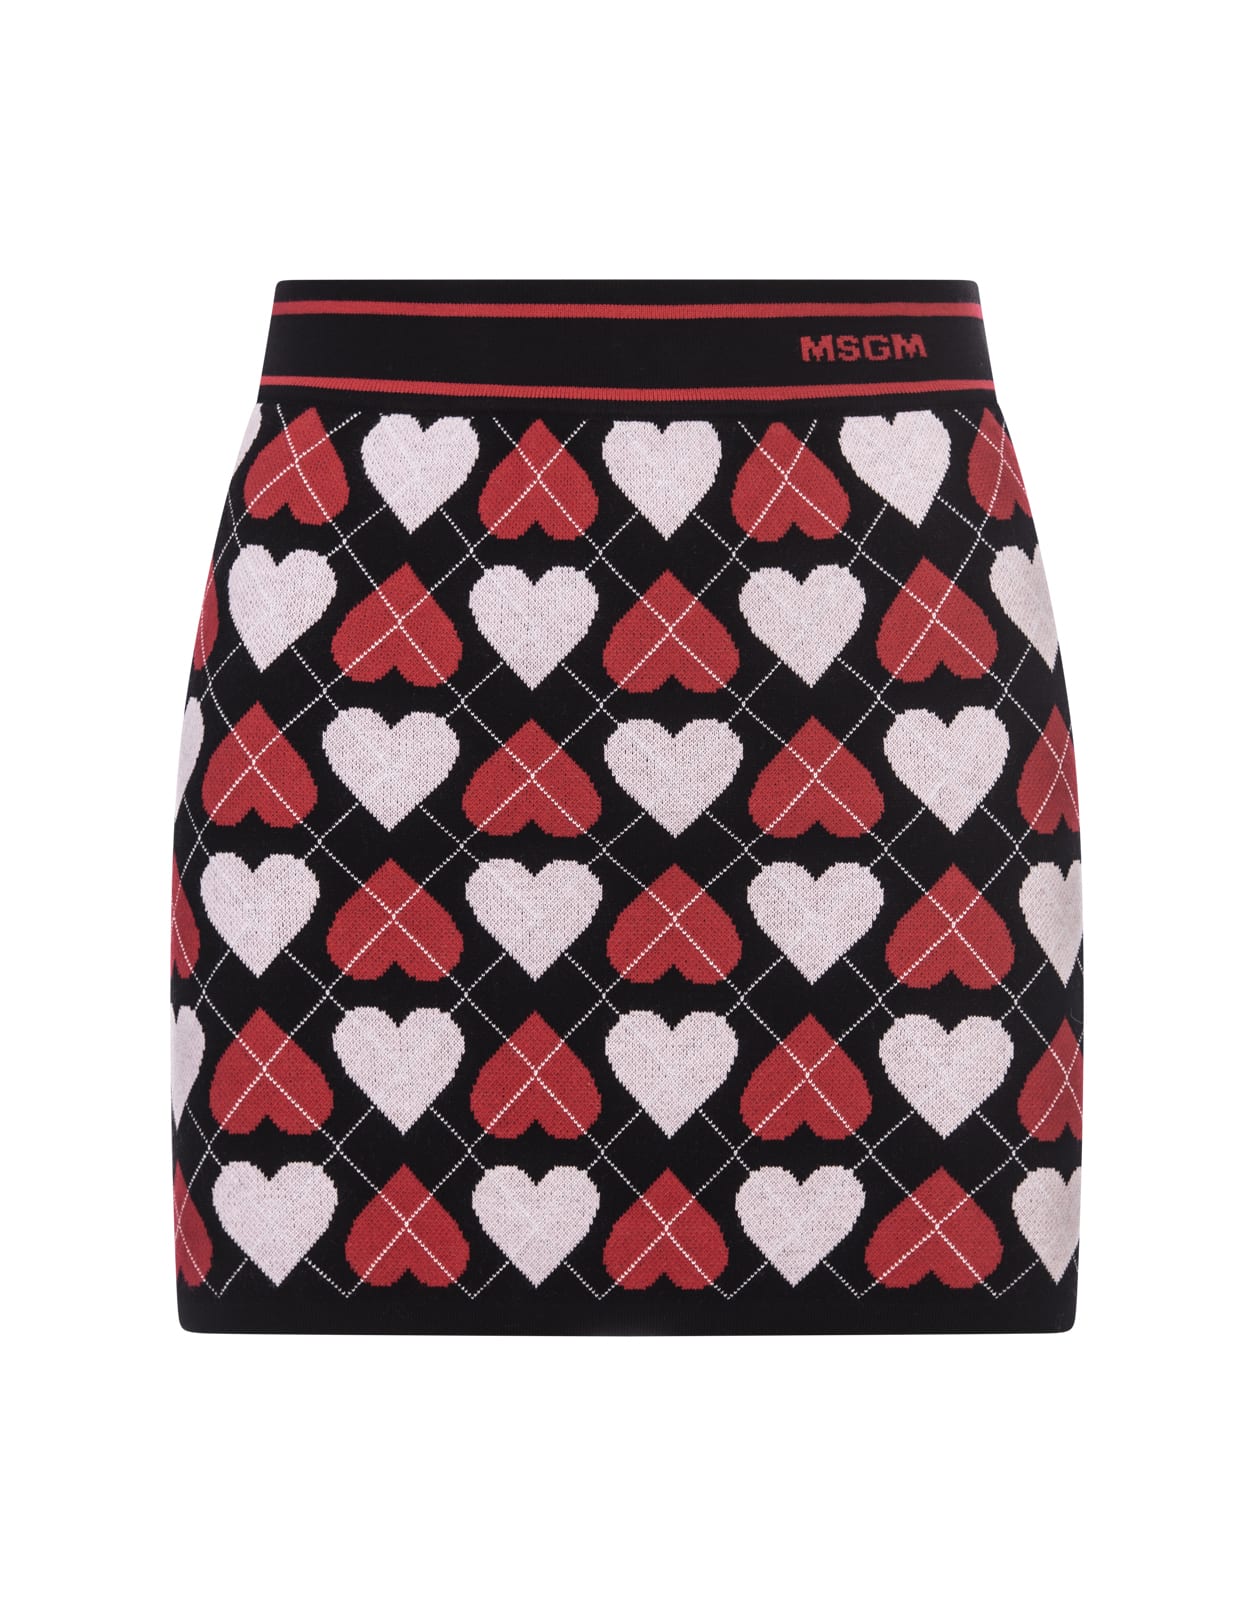 MSGM BLACK MINI SKIRT WITH ACTIVE HEARTS MOTIF